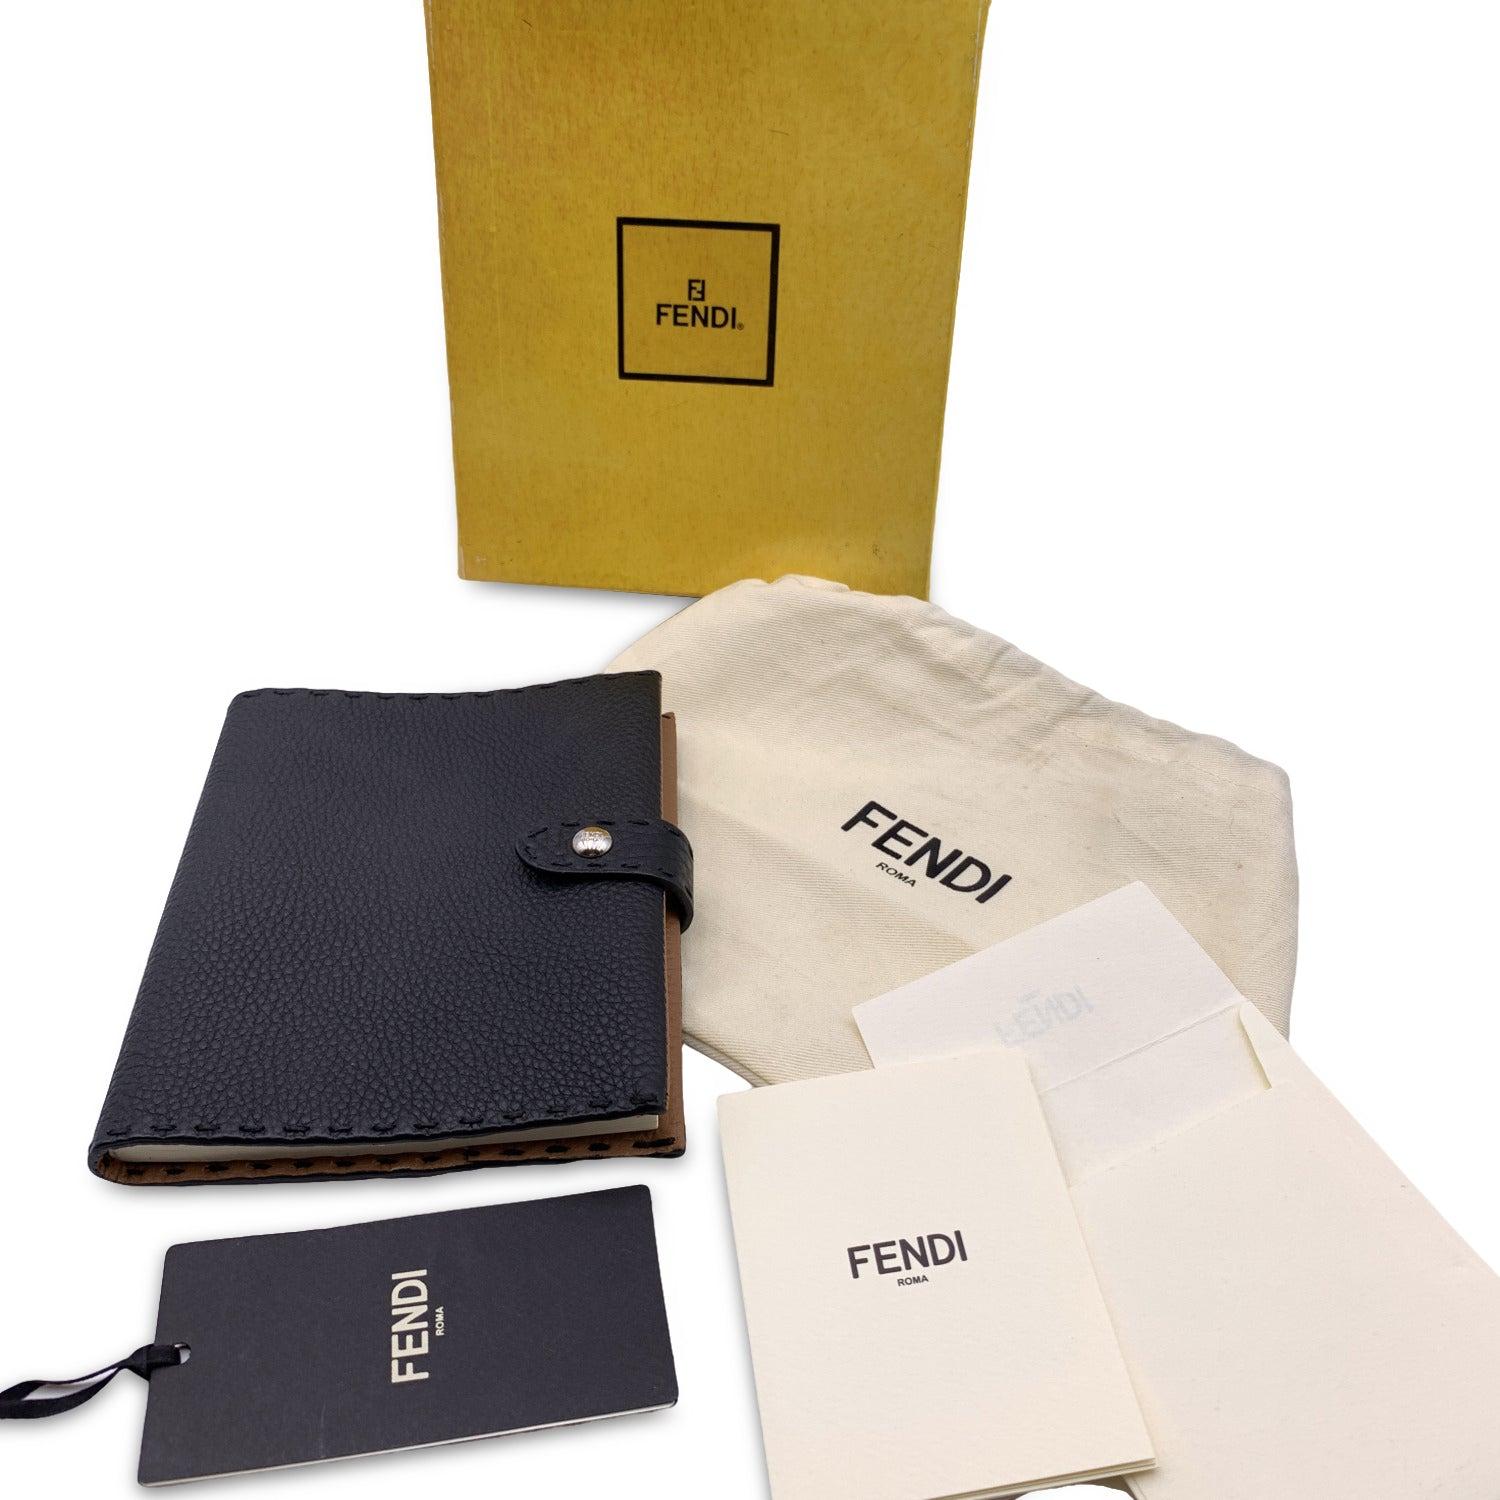 Fendi Selleria Weekly diary in black Roman leather. Beige interior. Rectangular shape with silver button closure. Agenda notebook inside. Measurements: 6.25 x 5.25 inches - 15.7 x 13.2 cm


Details

MATERIAL: Leather

COLOR: Black

MODEL: Weekly